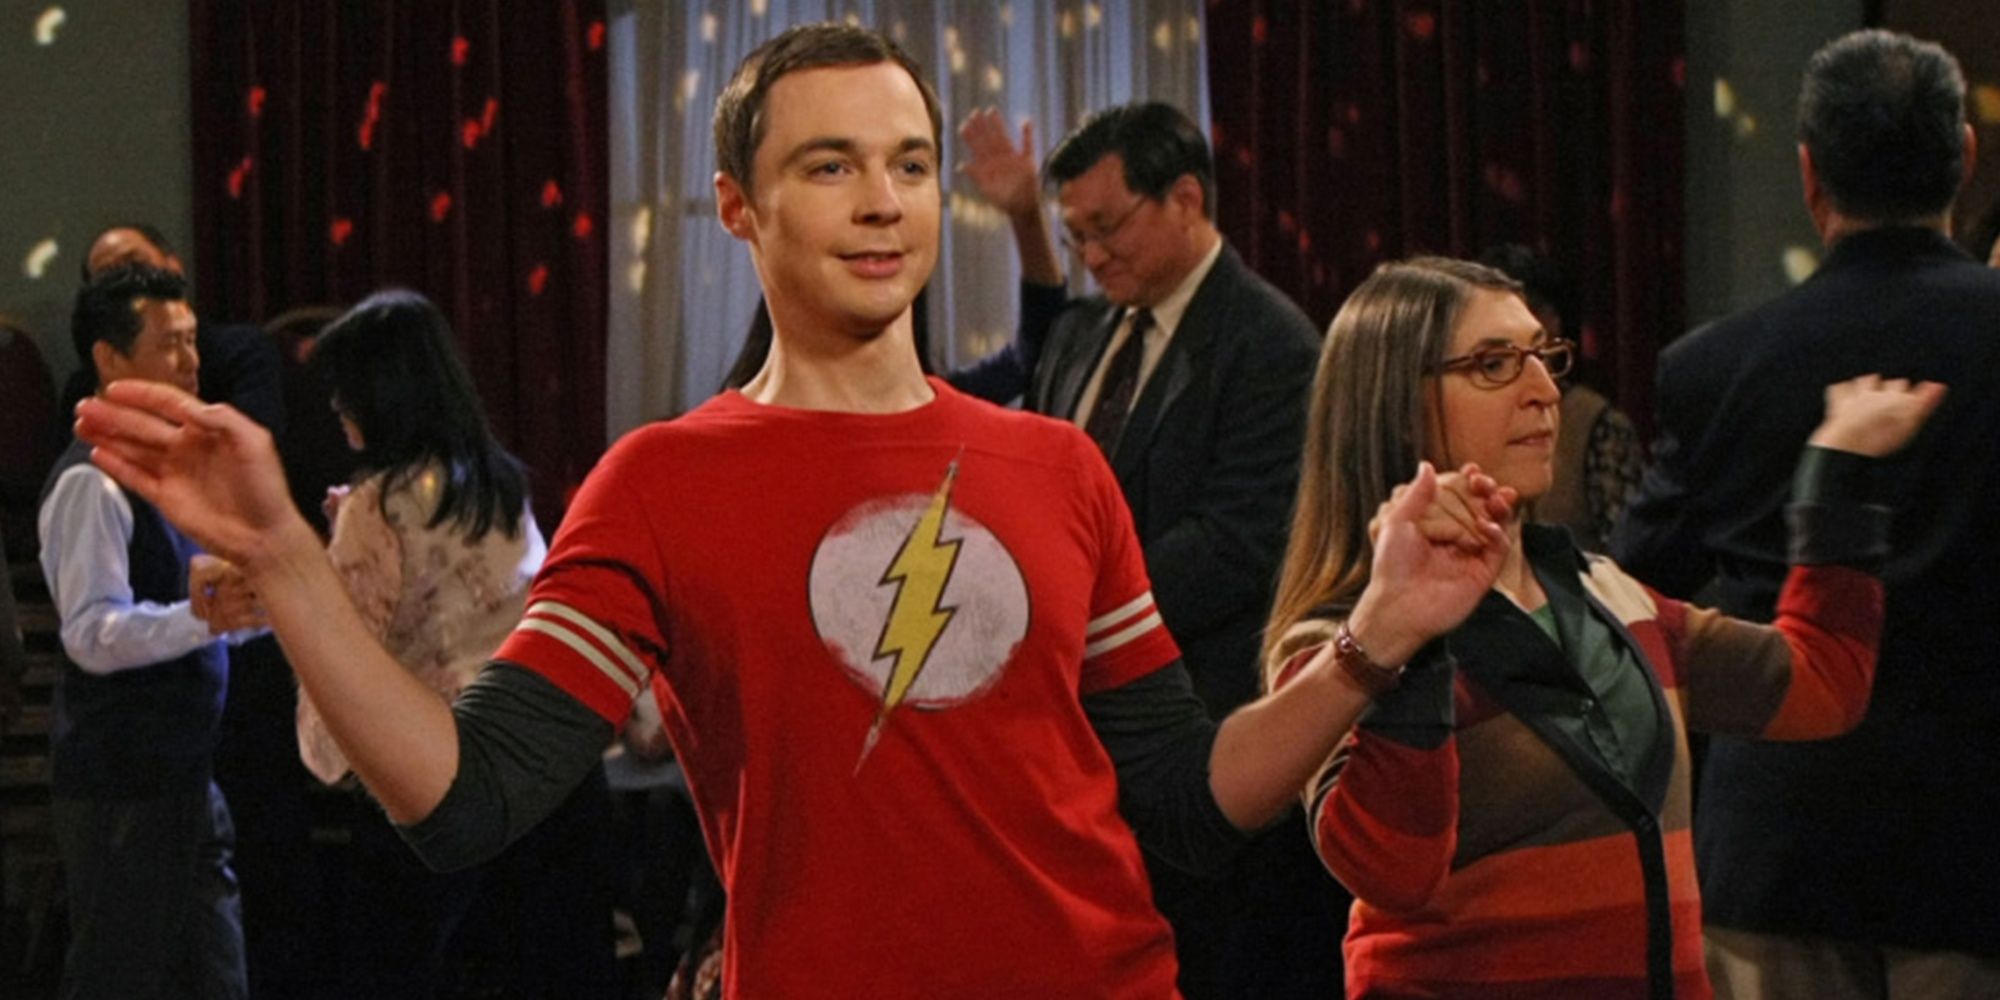 sheldon and amy from the big bang theory dancing